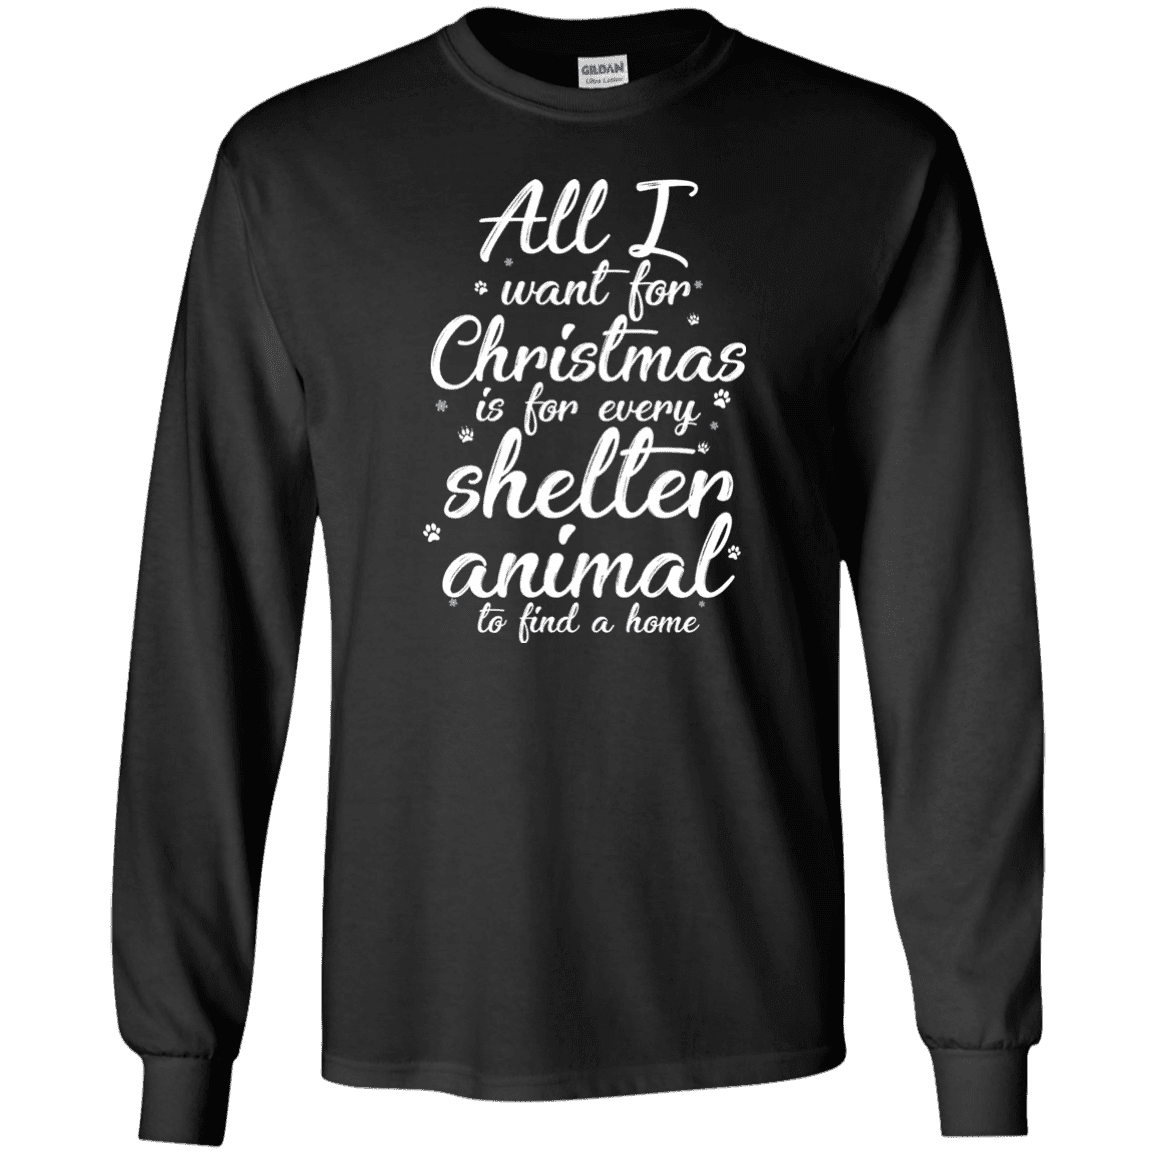 All I Want For Christmas - Long Sleeve T Shirt.